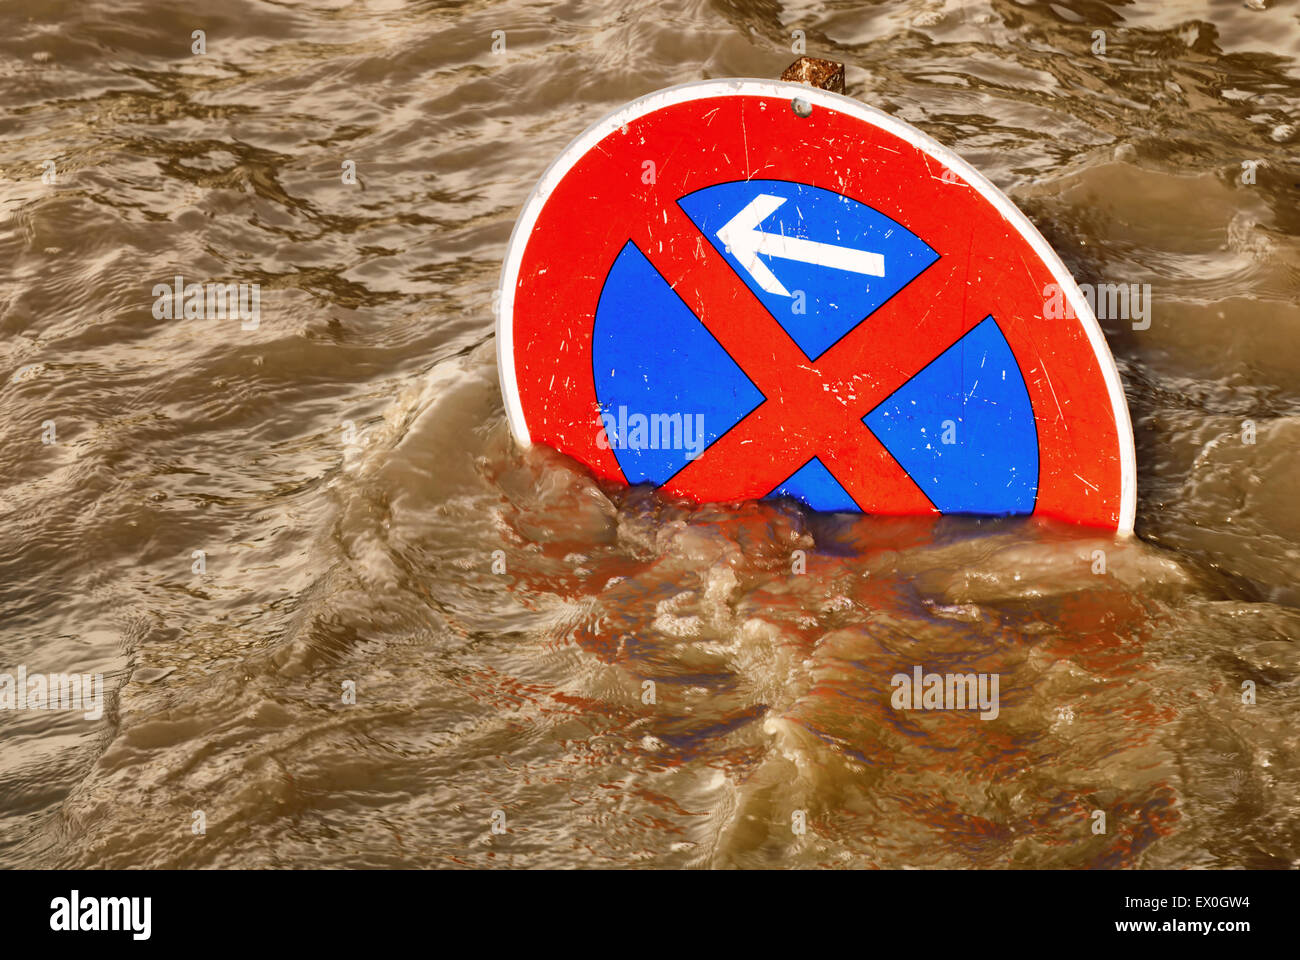 Humorous scene of a no parking traffic sign in a flood of brown water Stock Photo